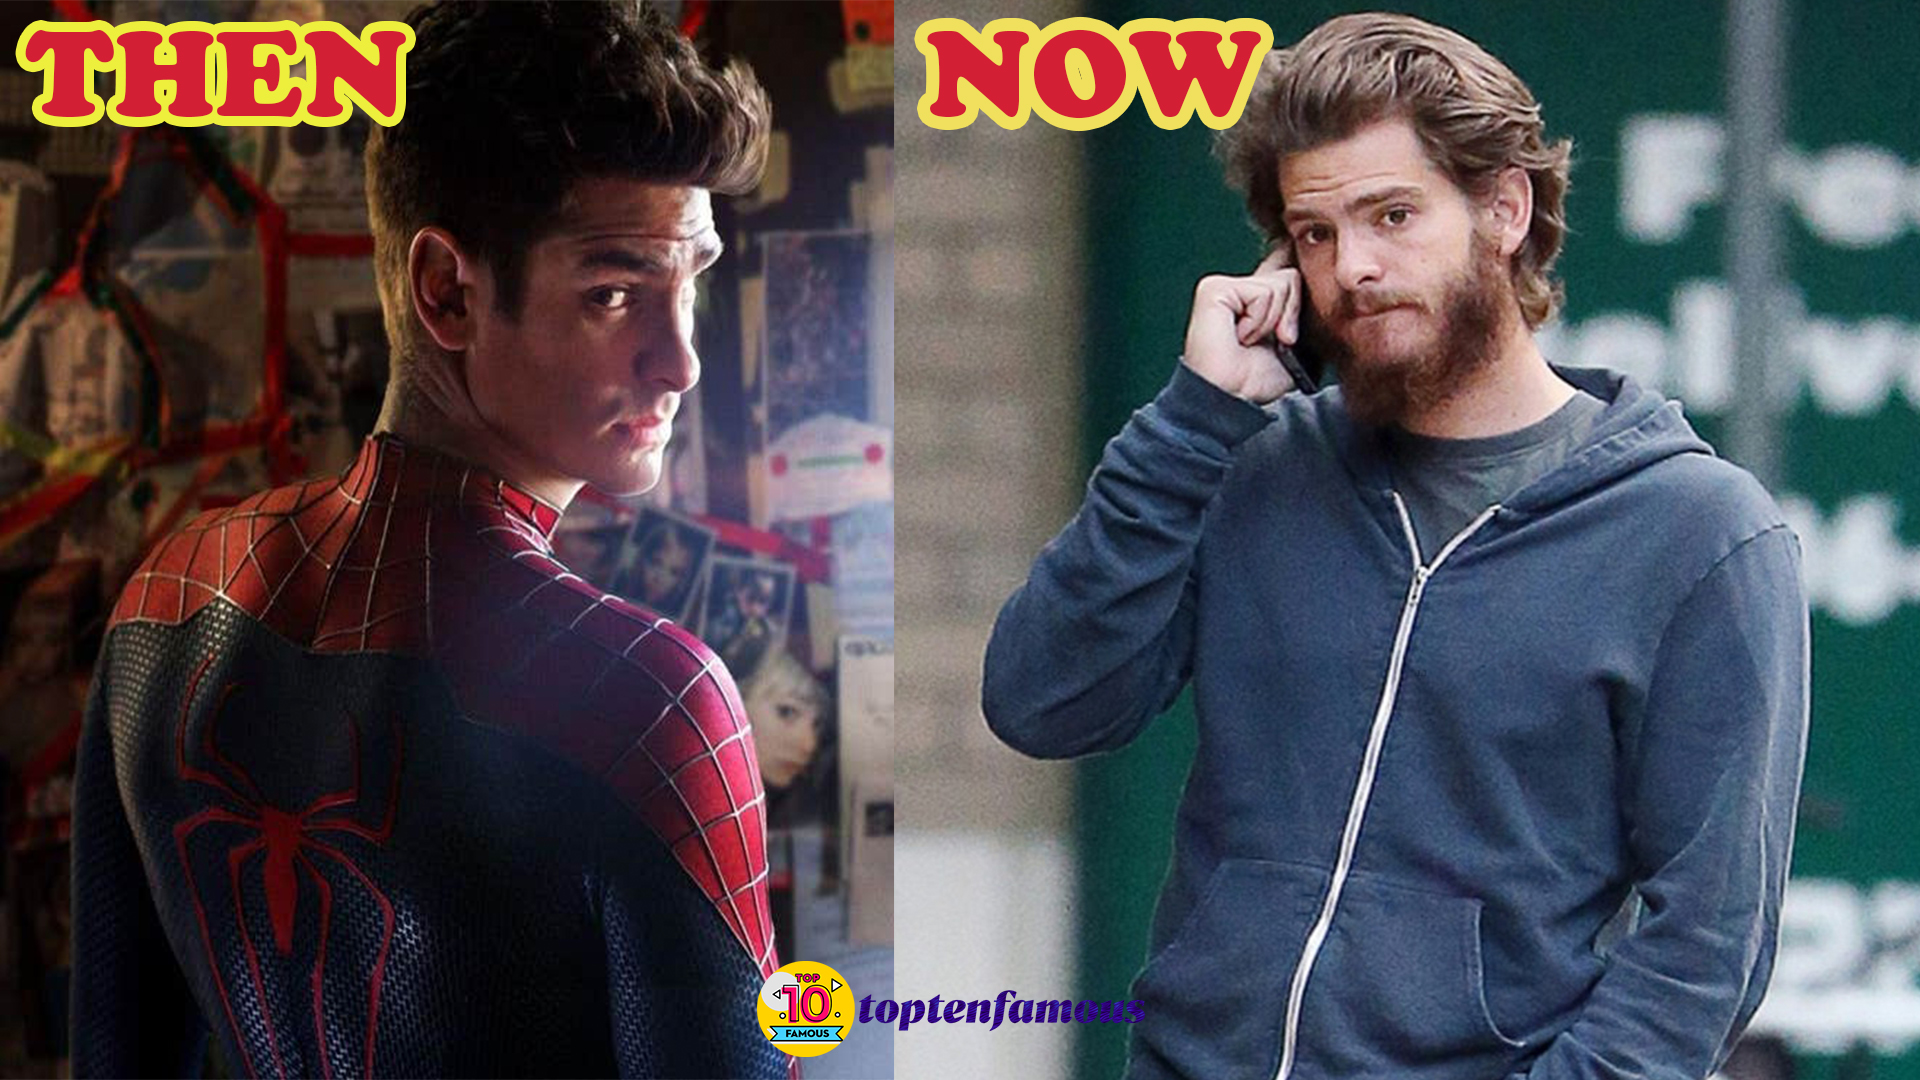 andrew garfield before and after